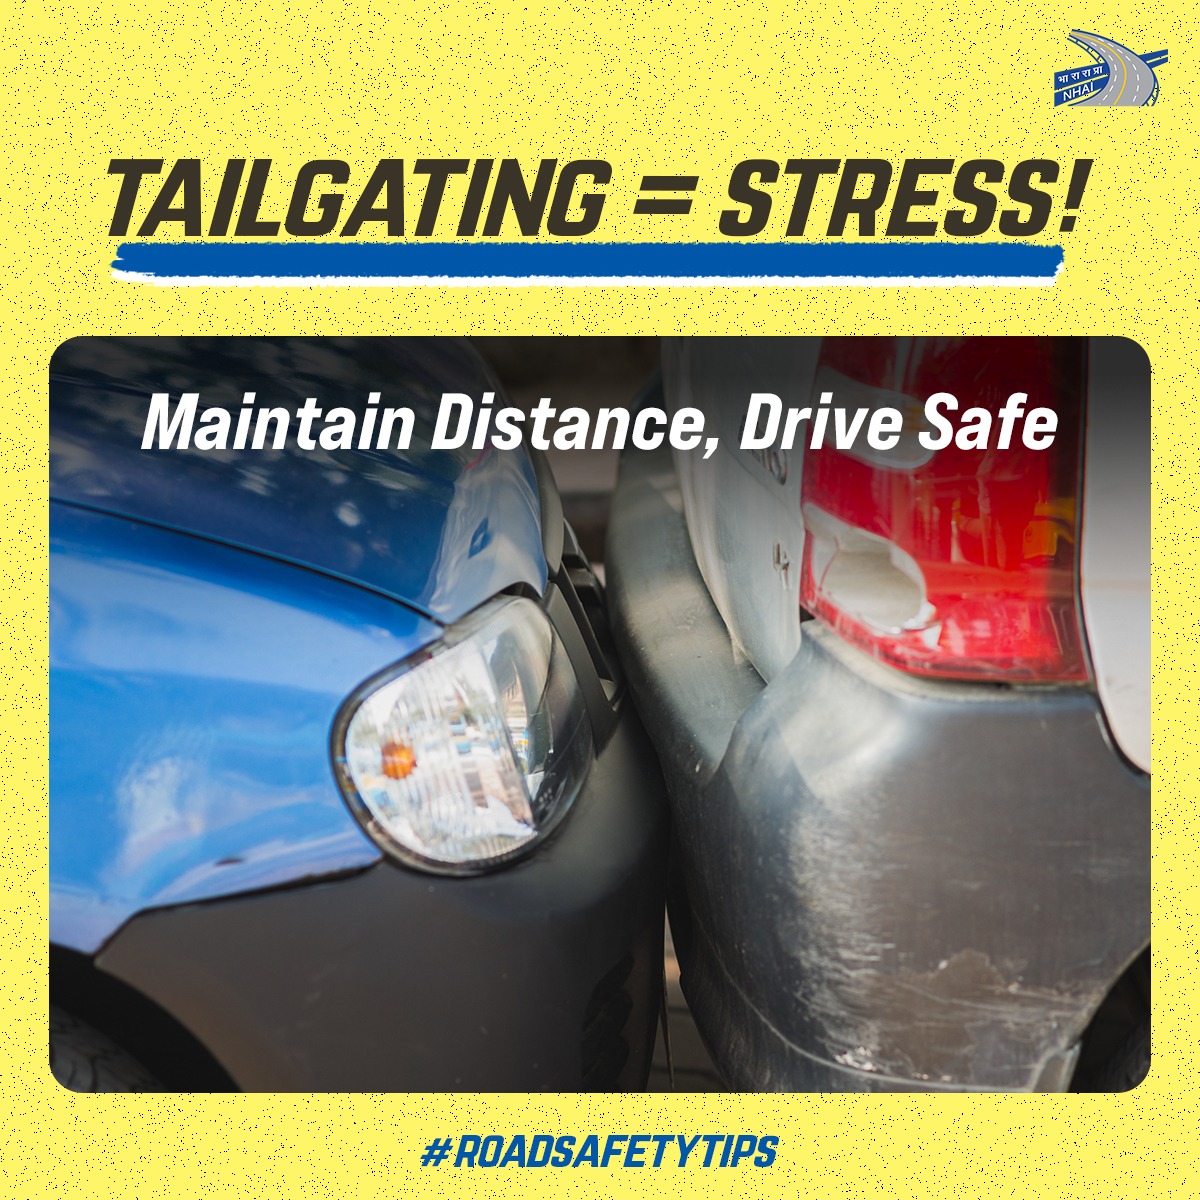 Tailgating or driving too close to the vehicle in front can be dangerous. Maintain a safe distance and drive safely. #NHAI #RoadSafetyTips